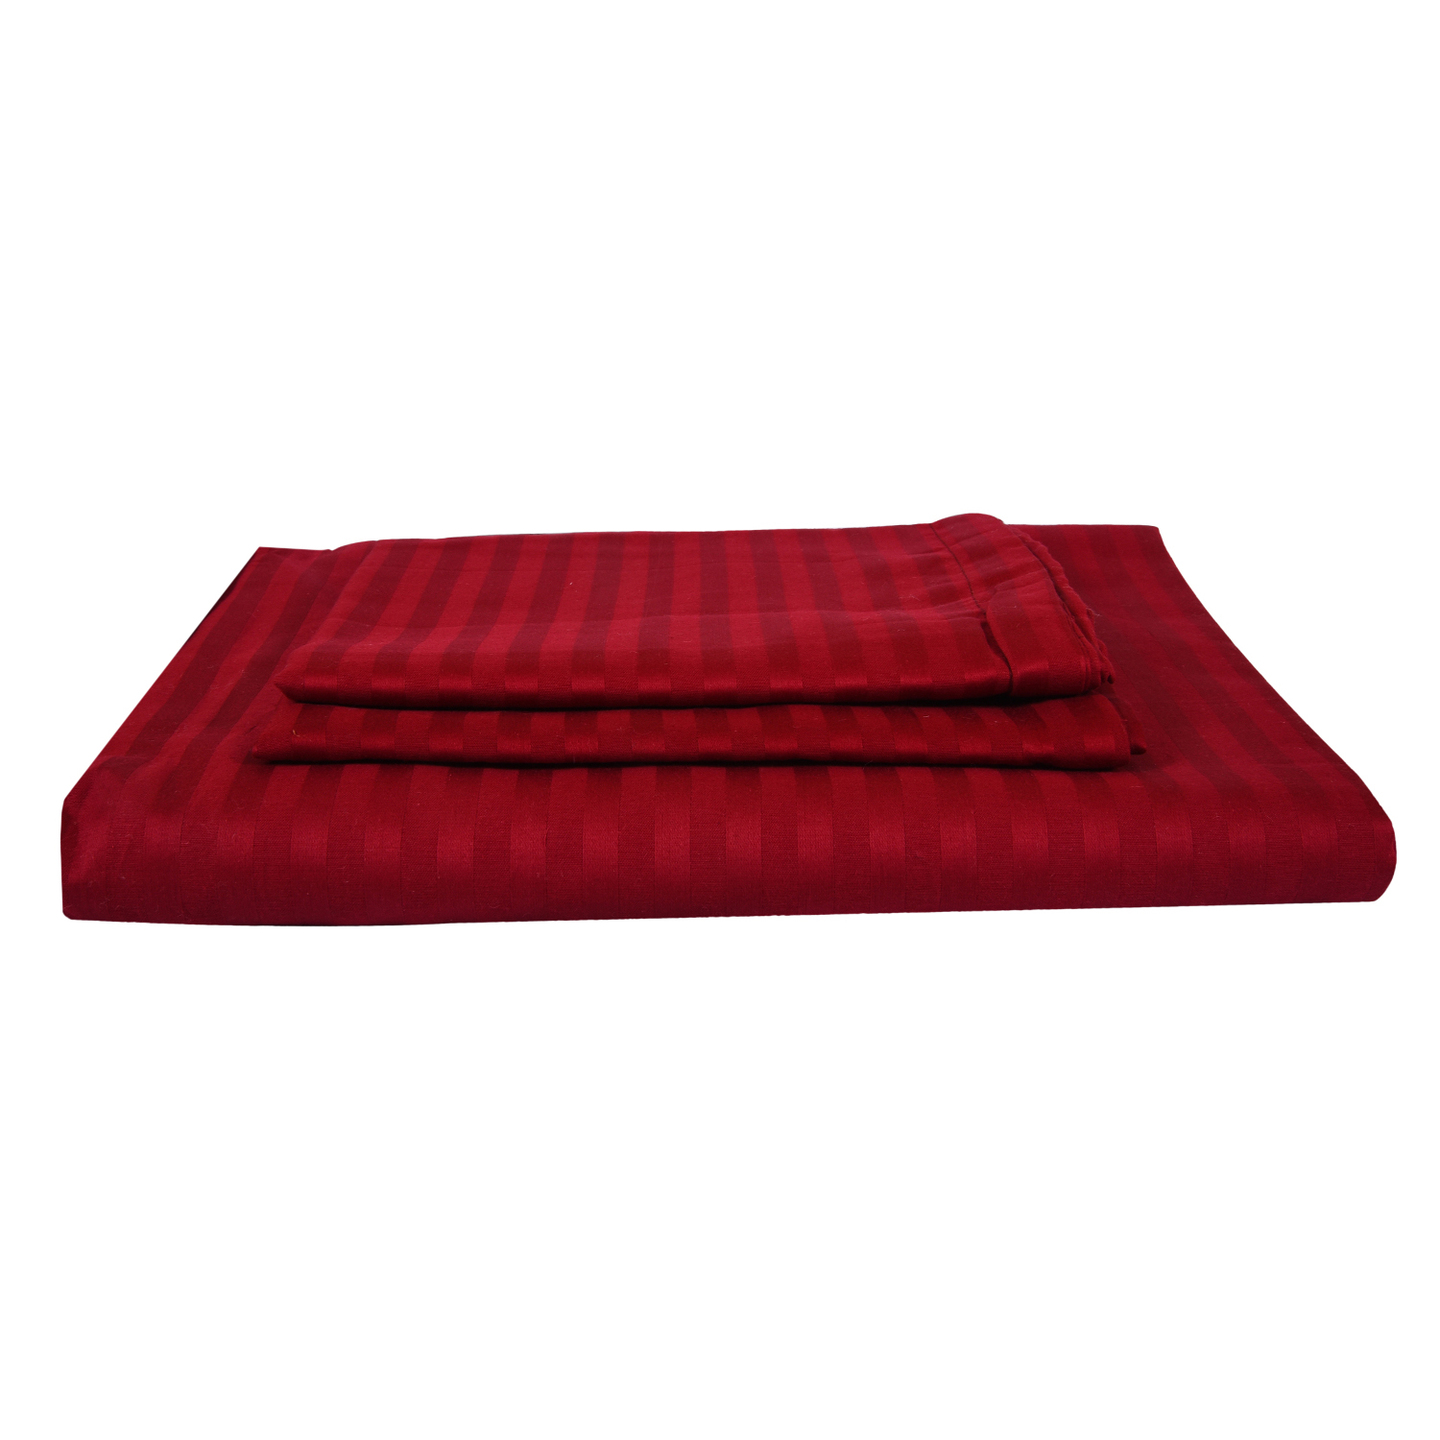 B-Sheets - 100% Cotton Sateen 210 TC King Size Fitted Bed Sheet with 2 Nos. Pillow Covers | Perfect Fit for King Size Spring Matressess Upto 6" Thick |Colour - Burgundy Maroon